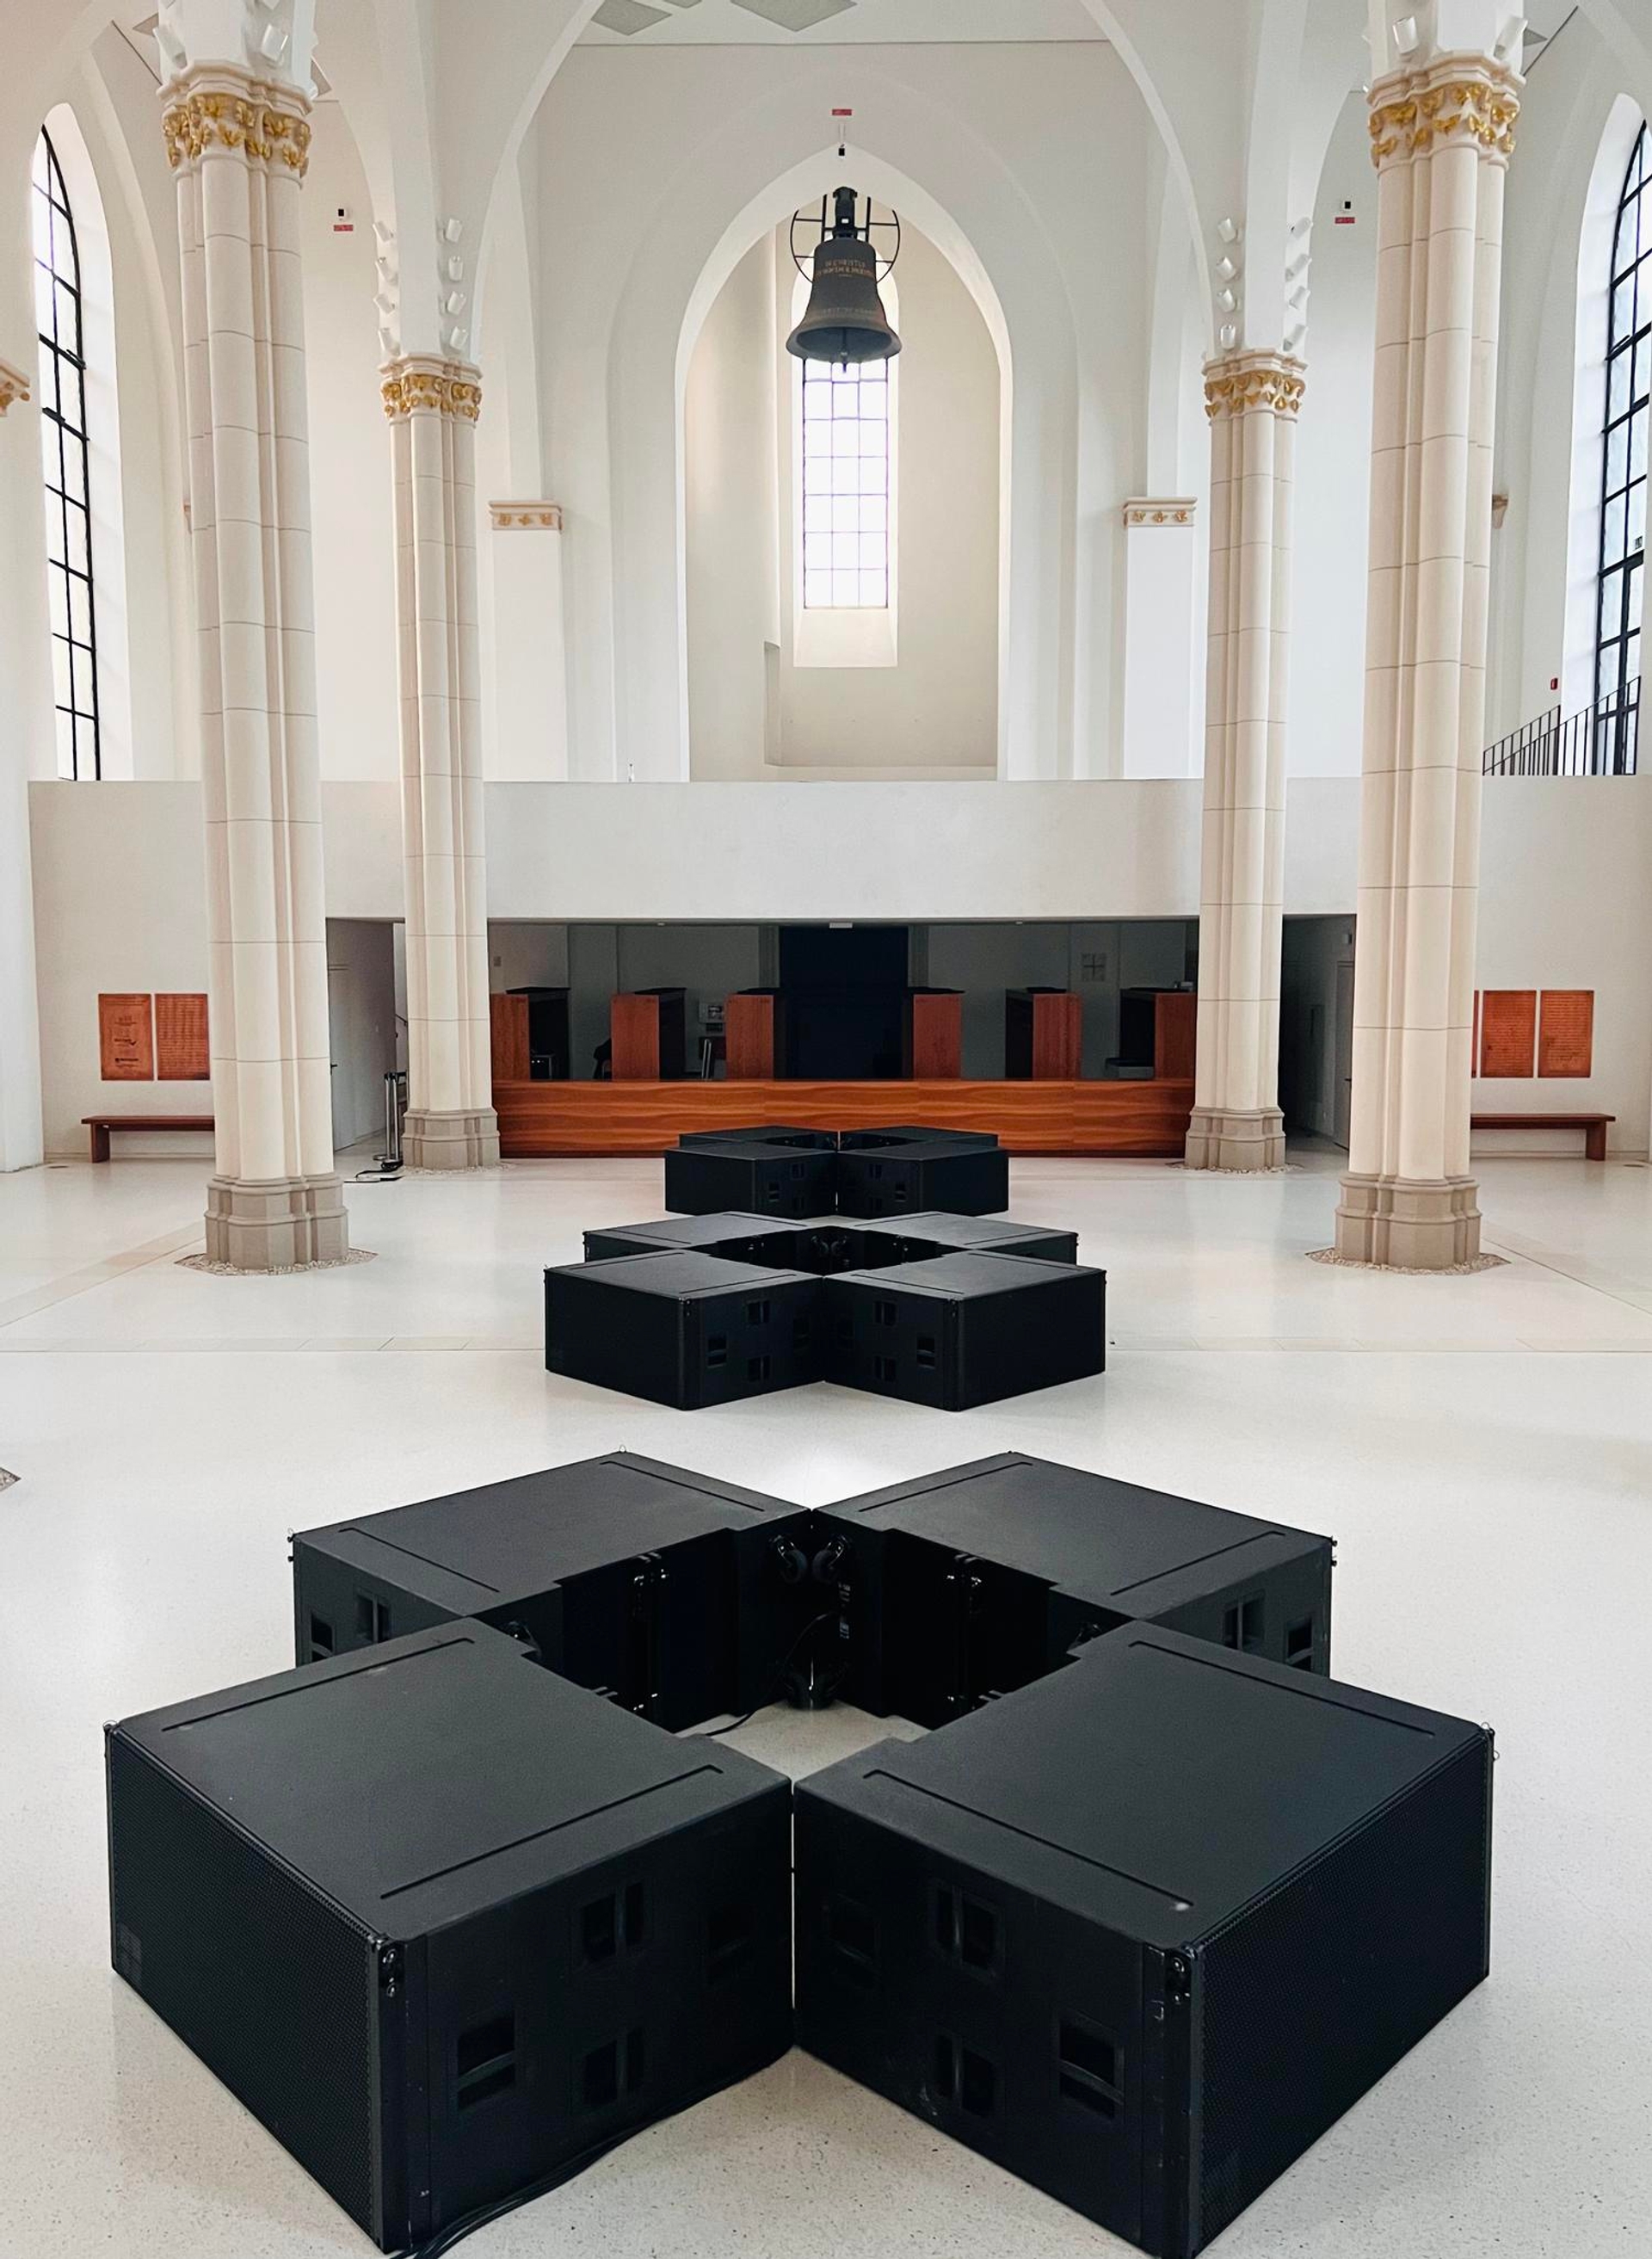 Stefanie Egedy, BODIES AND SUBWOOFERS (B.A.S.) 12.0: PRESENCE, installation and three live performances at St.Marien Church for DIVE Festival, Bochum, Germany, November 2023. Courtesy Stefanie Egedy.